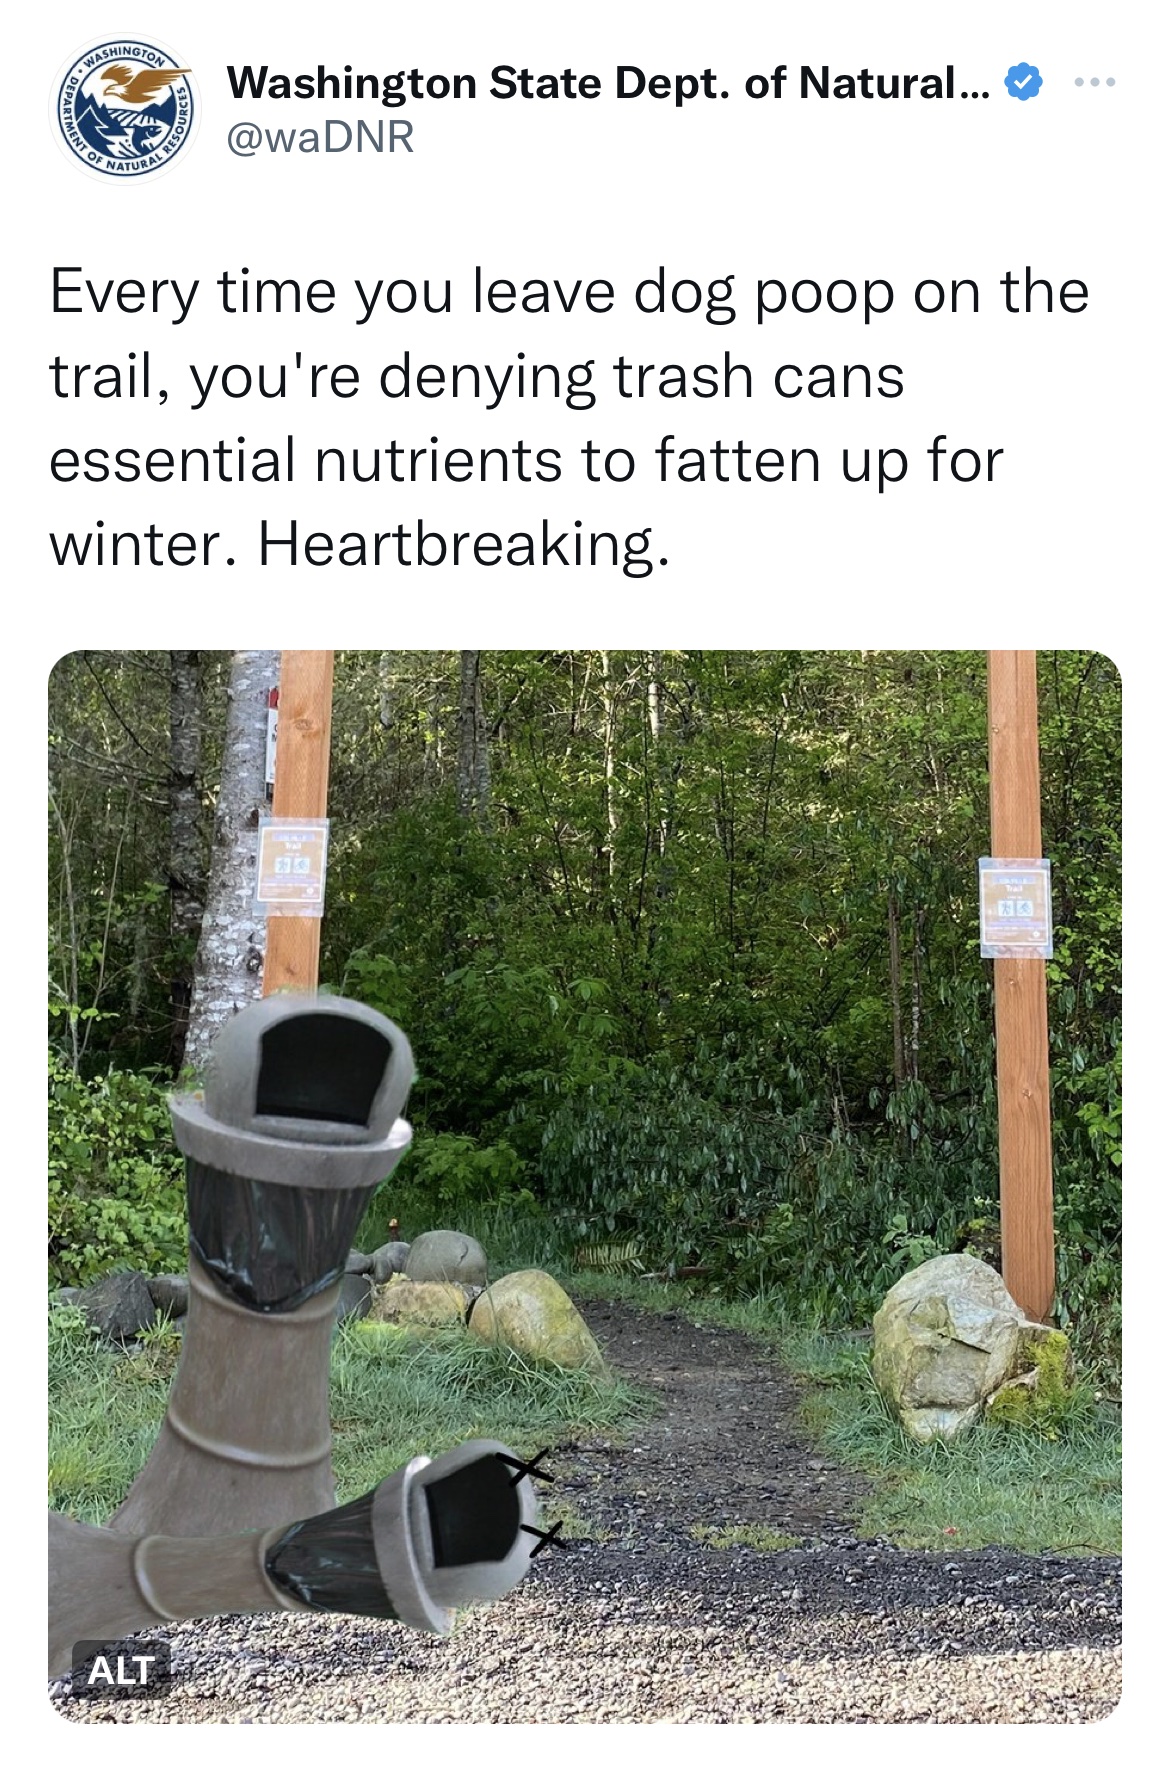 Washington Department of Natural Resources tweets - grass - Washington State Dept. of Natural... Every time you leave dog poop on the trail, you're denying trash cans essential nutrients to fatten up for winter. Heartbreaking. Alt